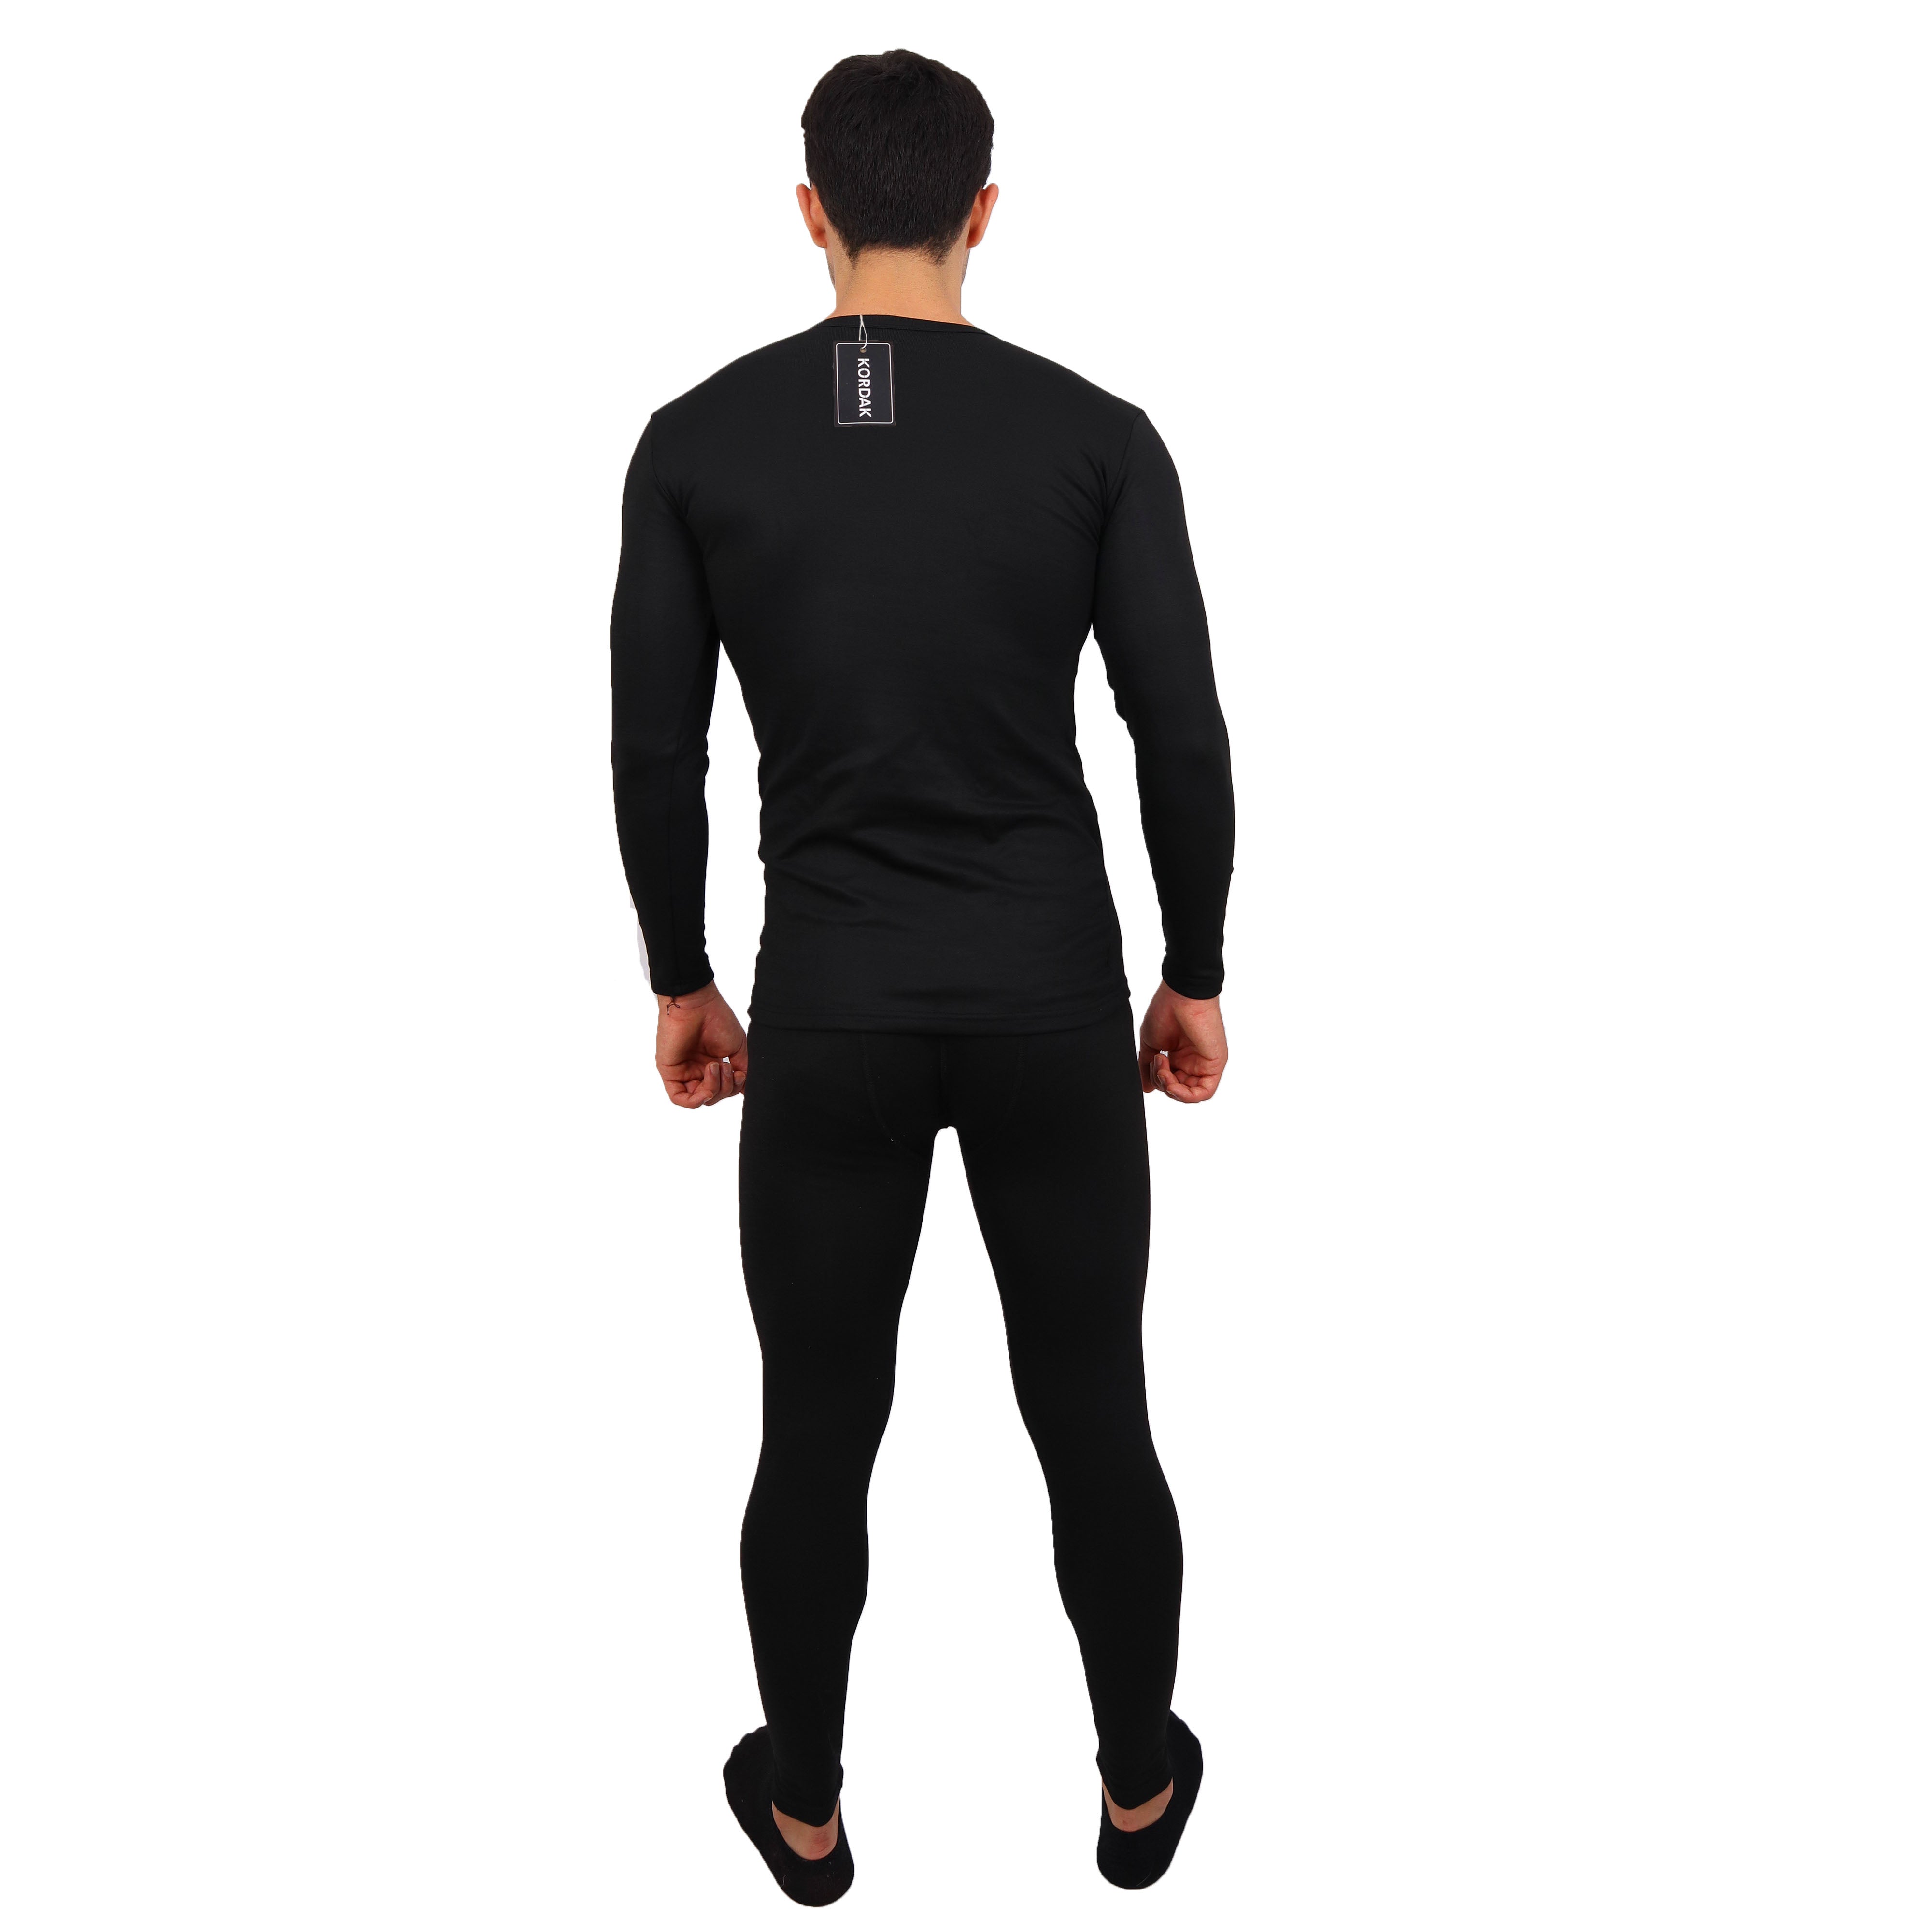 Black Thermal Underwear Set - Keeping Warm Against the Cold Top-Bottom Set